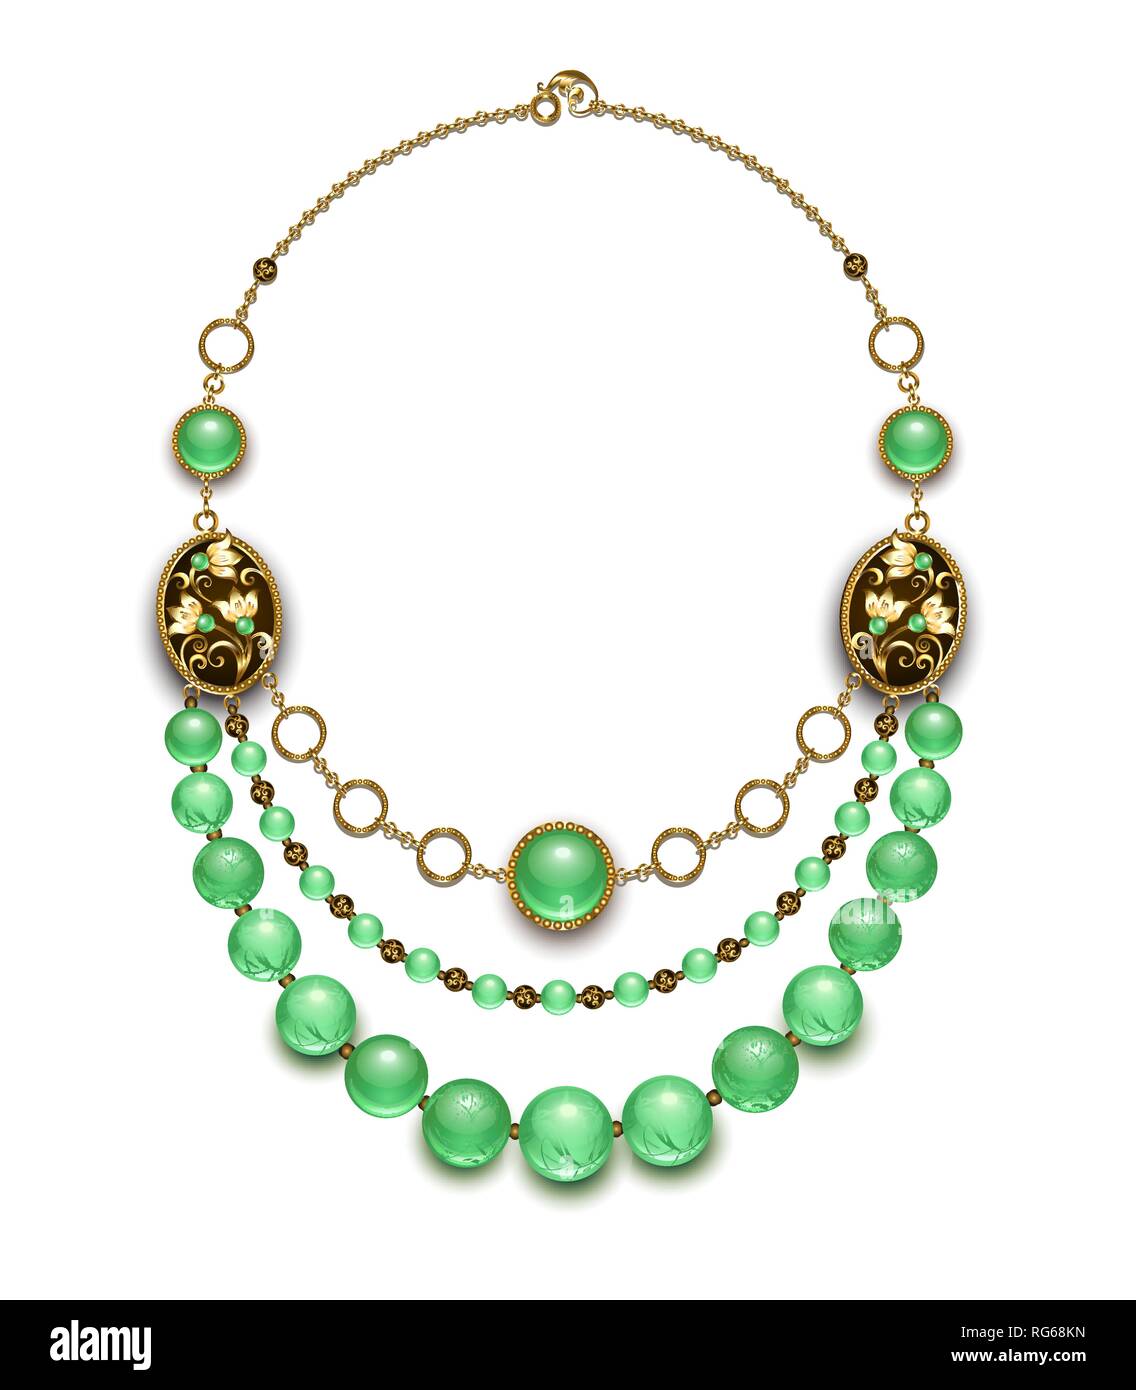 Necklace of round chrysoprase, brass beads and chains on white background. Stock Vector